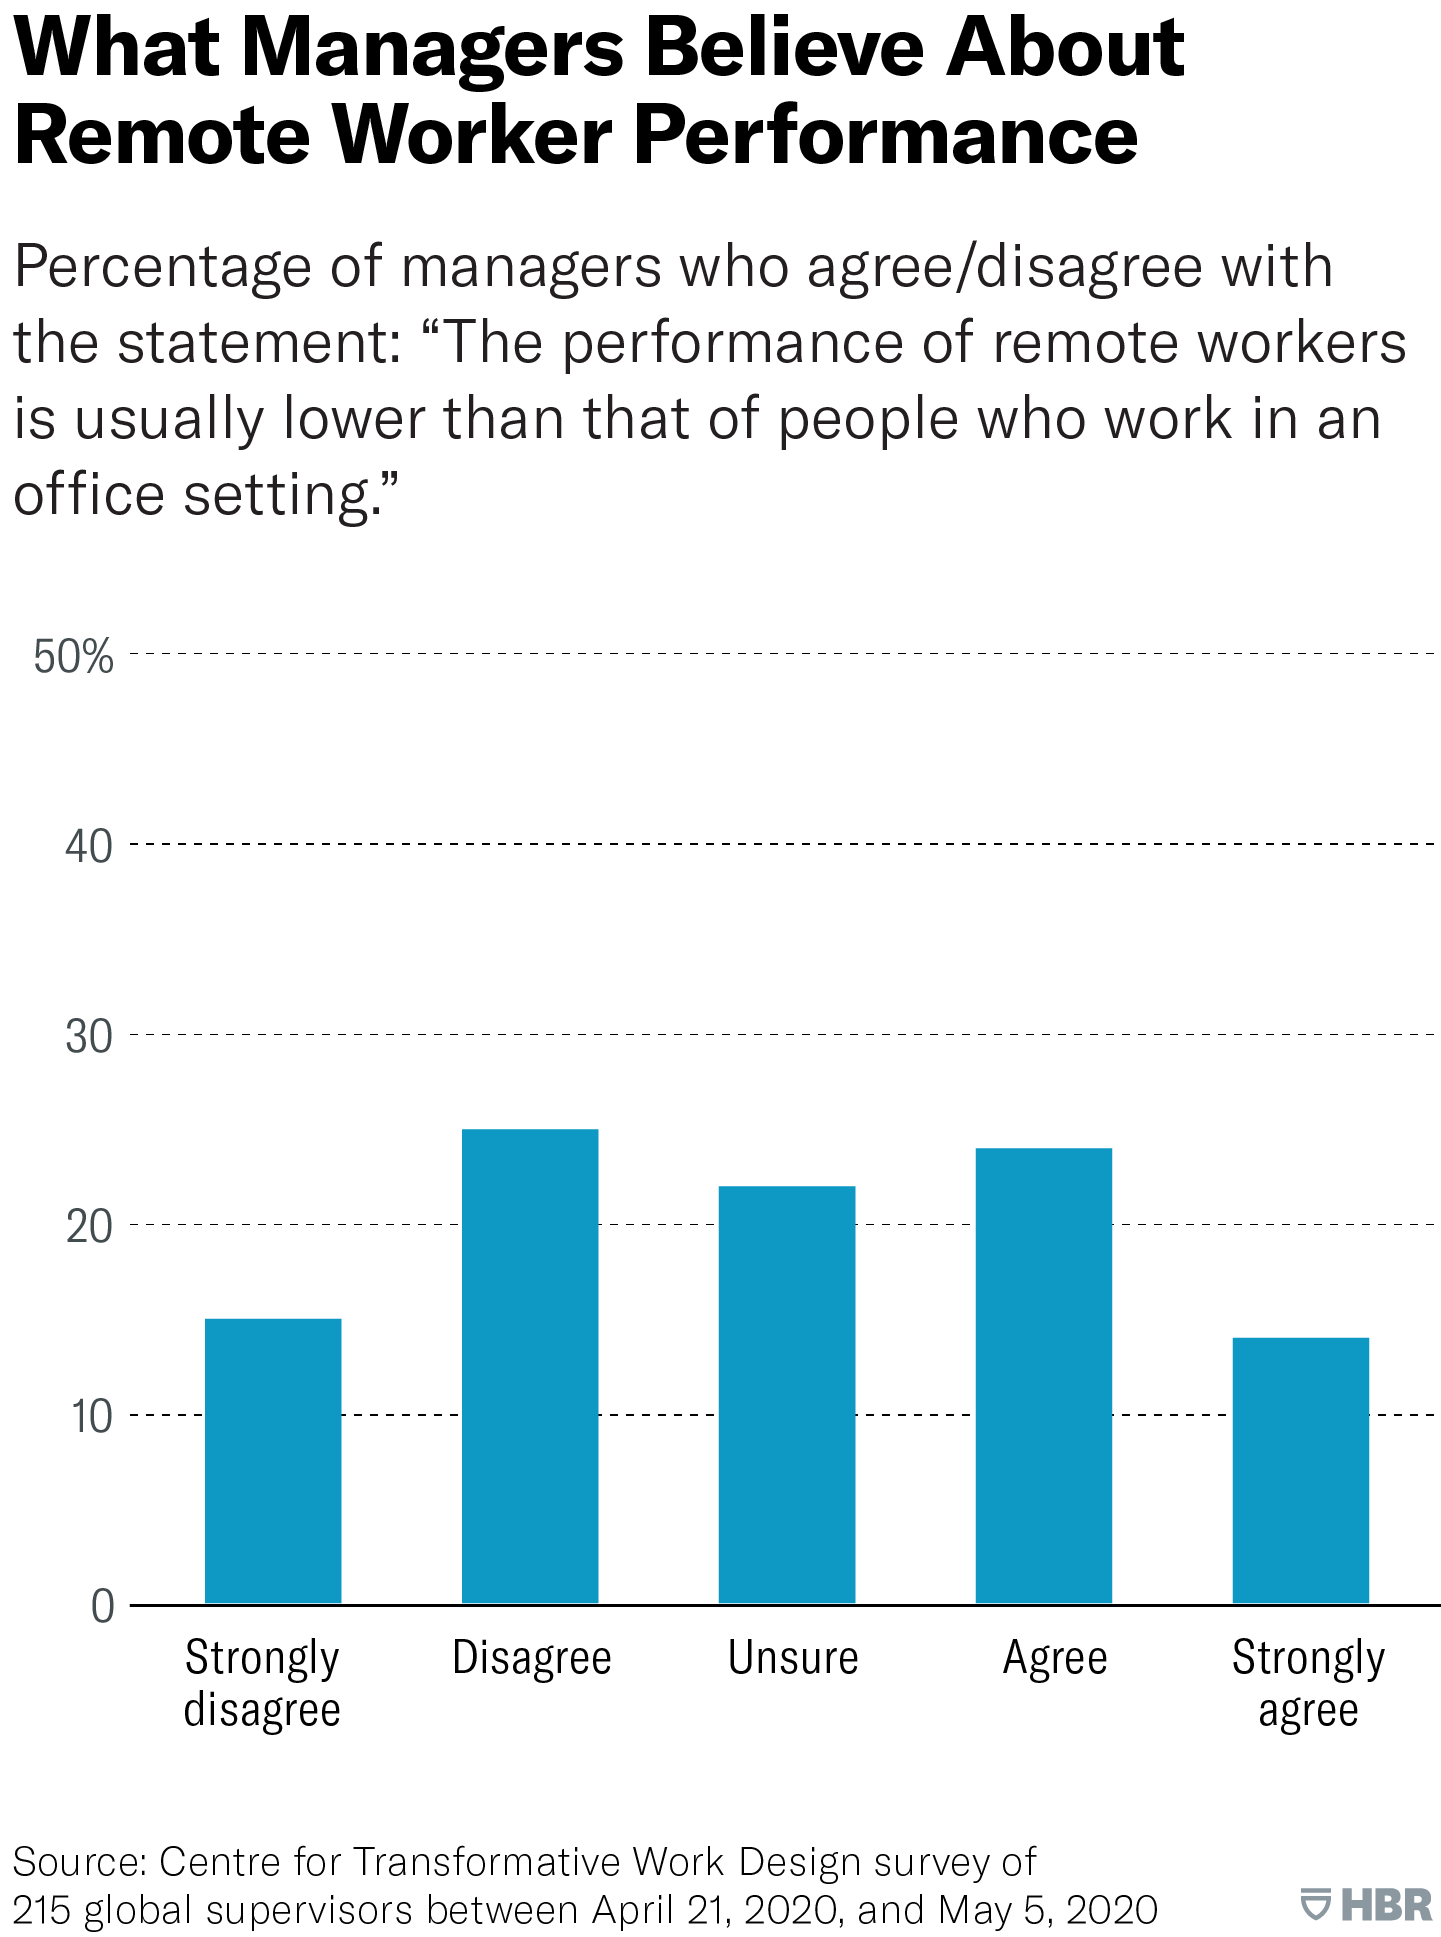 HBR report on remote worker performance graphic